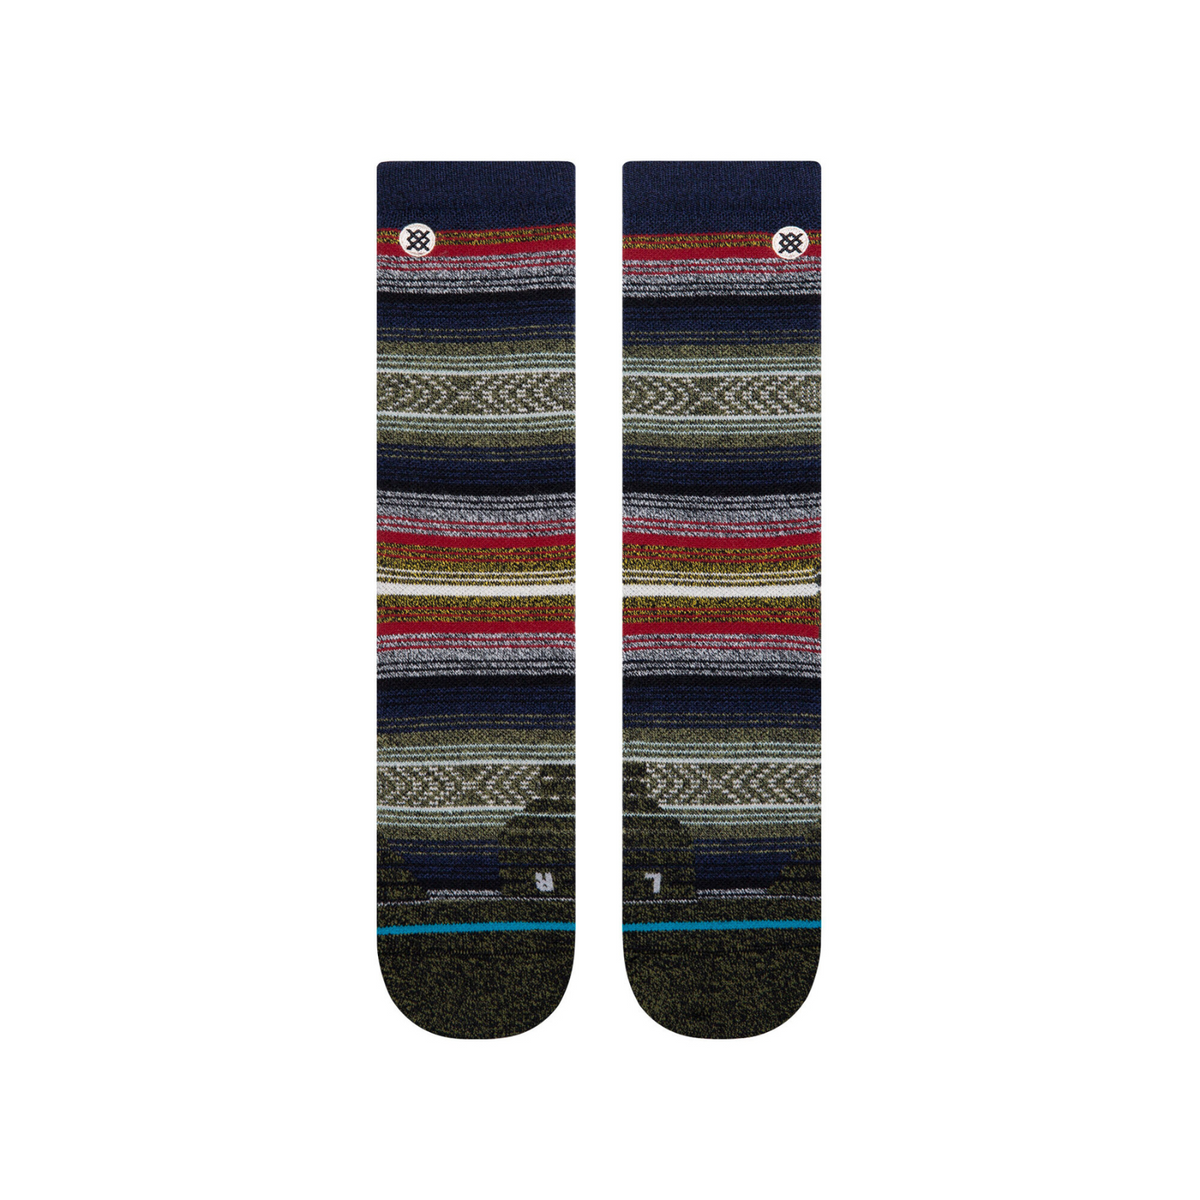 Top of Stance Windy Peak Hike medium cushion men&#39;s sock featuring green, black, white and red stripes